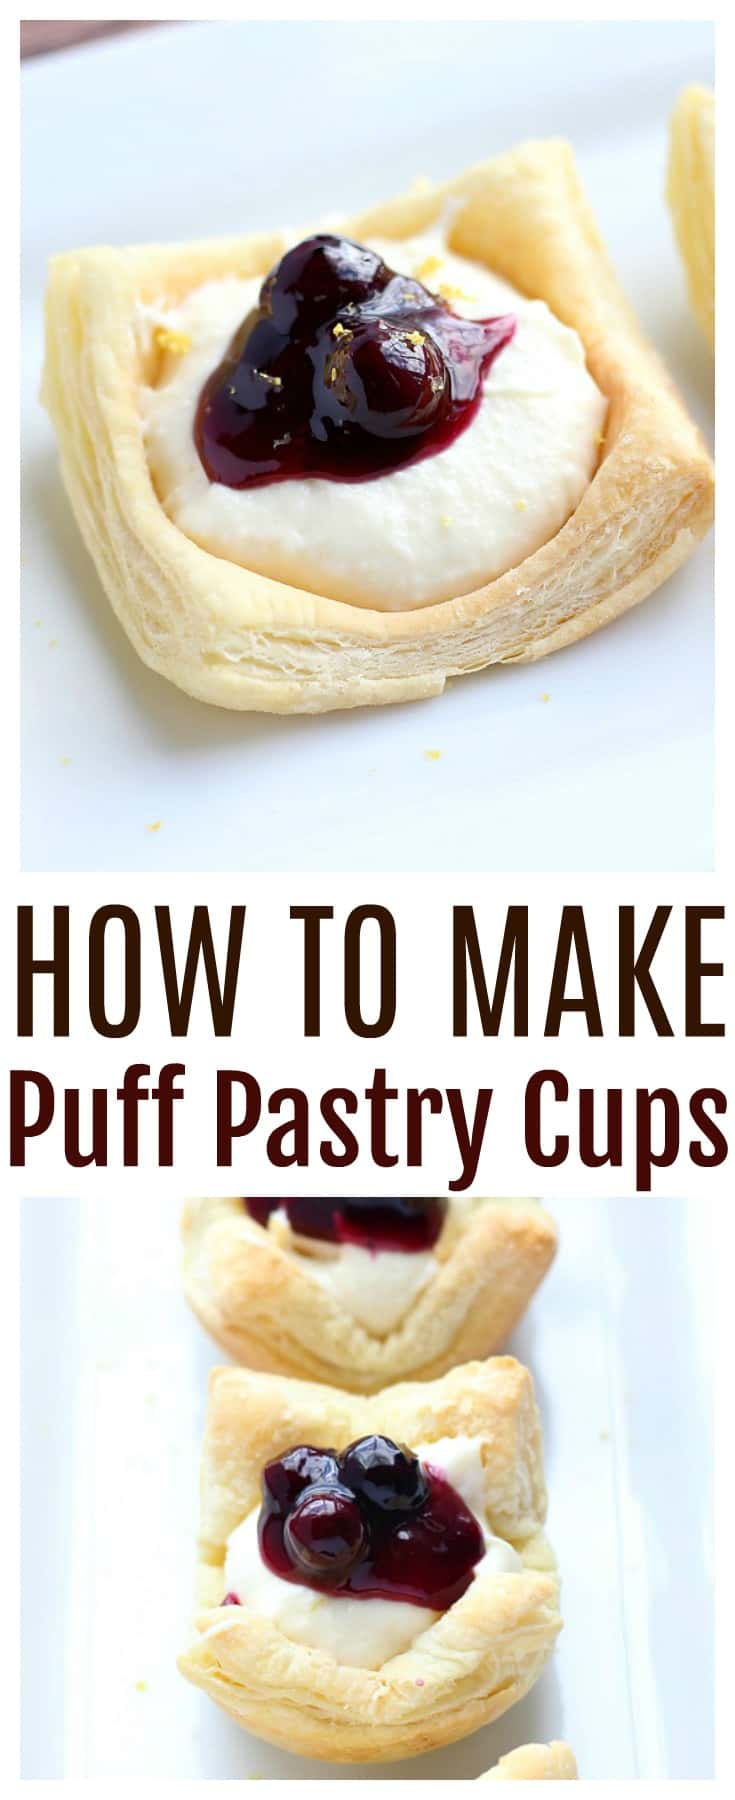 How to Make Puff Pastry Cups (2 methods) - Puff pastry cups can be used for so many delicious desserts and appetizers! These are two easy tutorials on how to make your own puff pastry cups! | #dlbrecipes #puffpastry #howto #puffpastrycups #desserts #appetizers